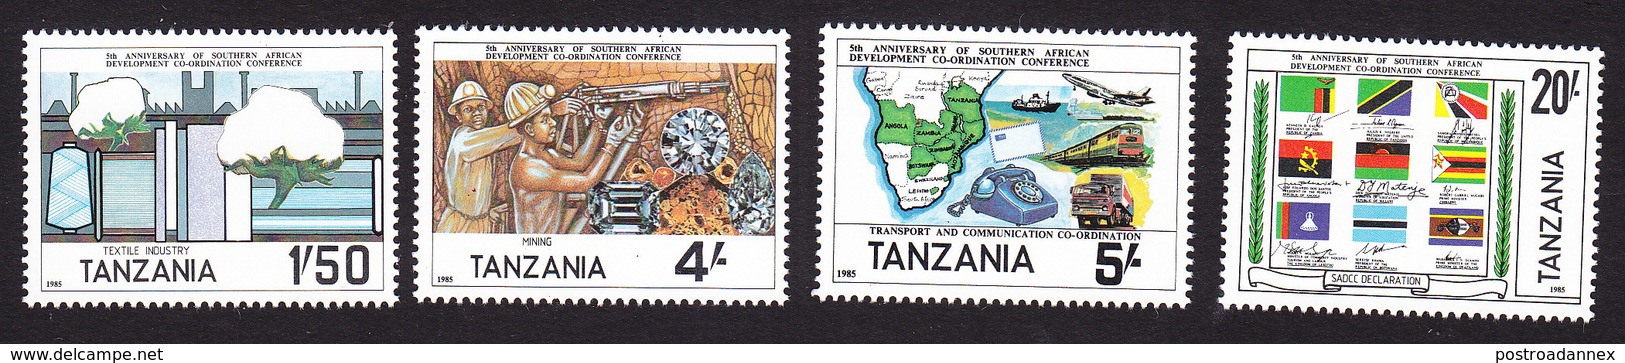 Tanzania, Scott #254-257, Mint Hinged, Southern Africa Development Coordination Conference, Issued 1985 - Tanzania (1964-...)